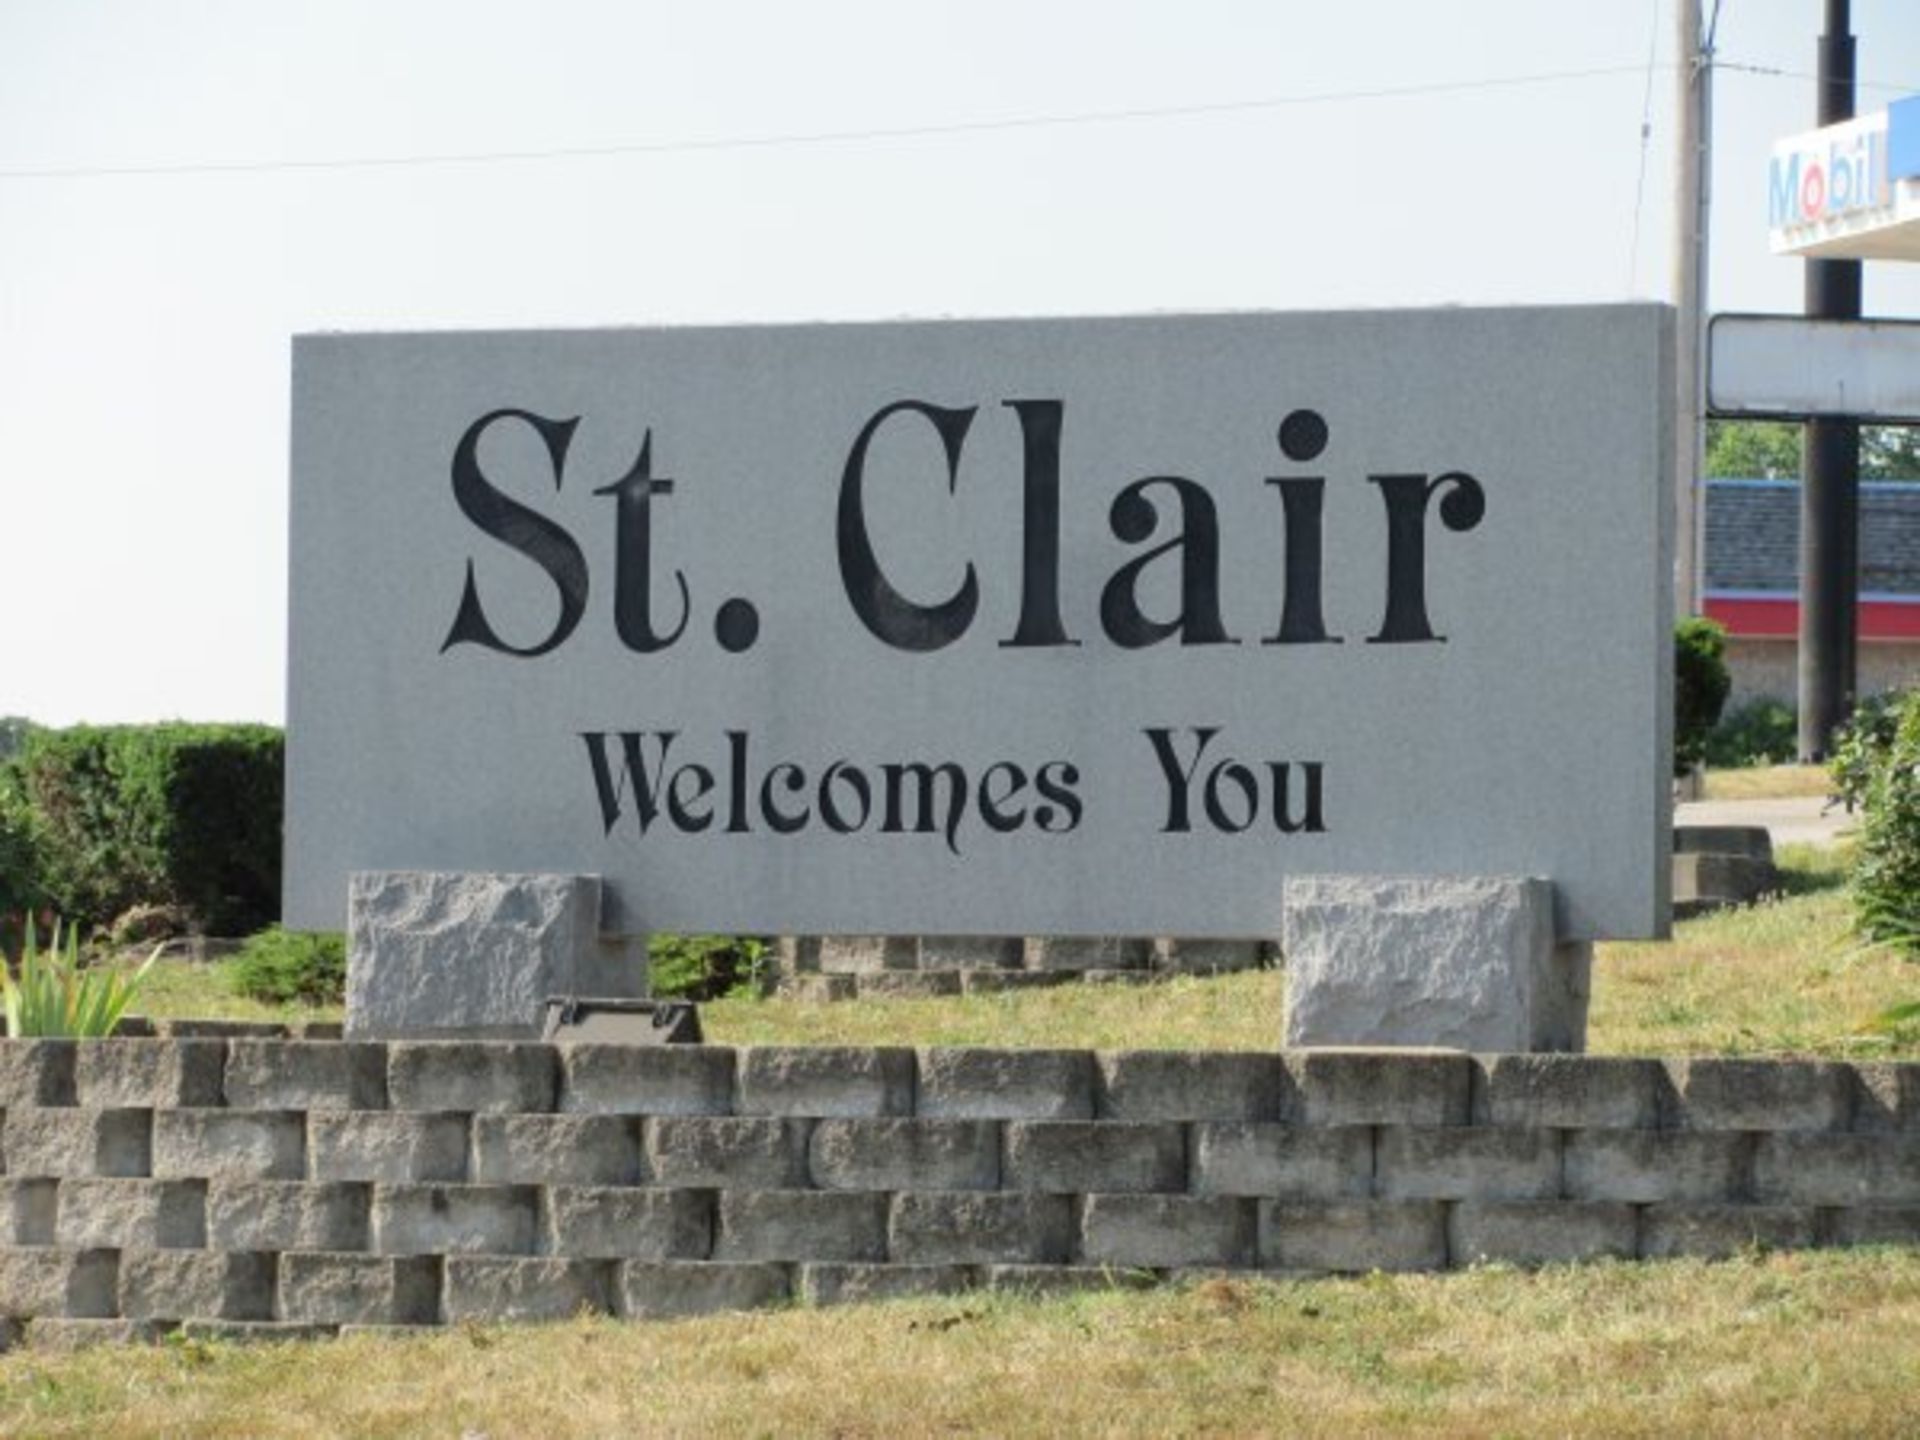 Seek Out the Perfect Camping Location Near Truman Lake in St. Clair, Missouri! - Image 15 of 15